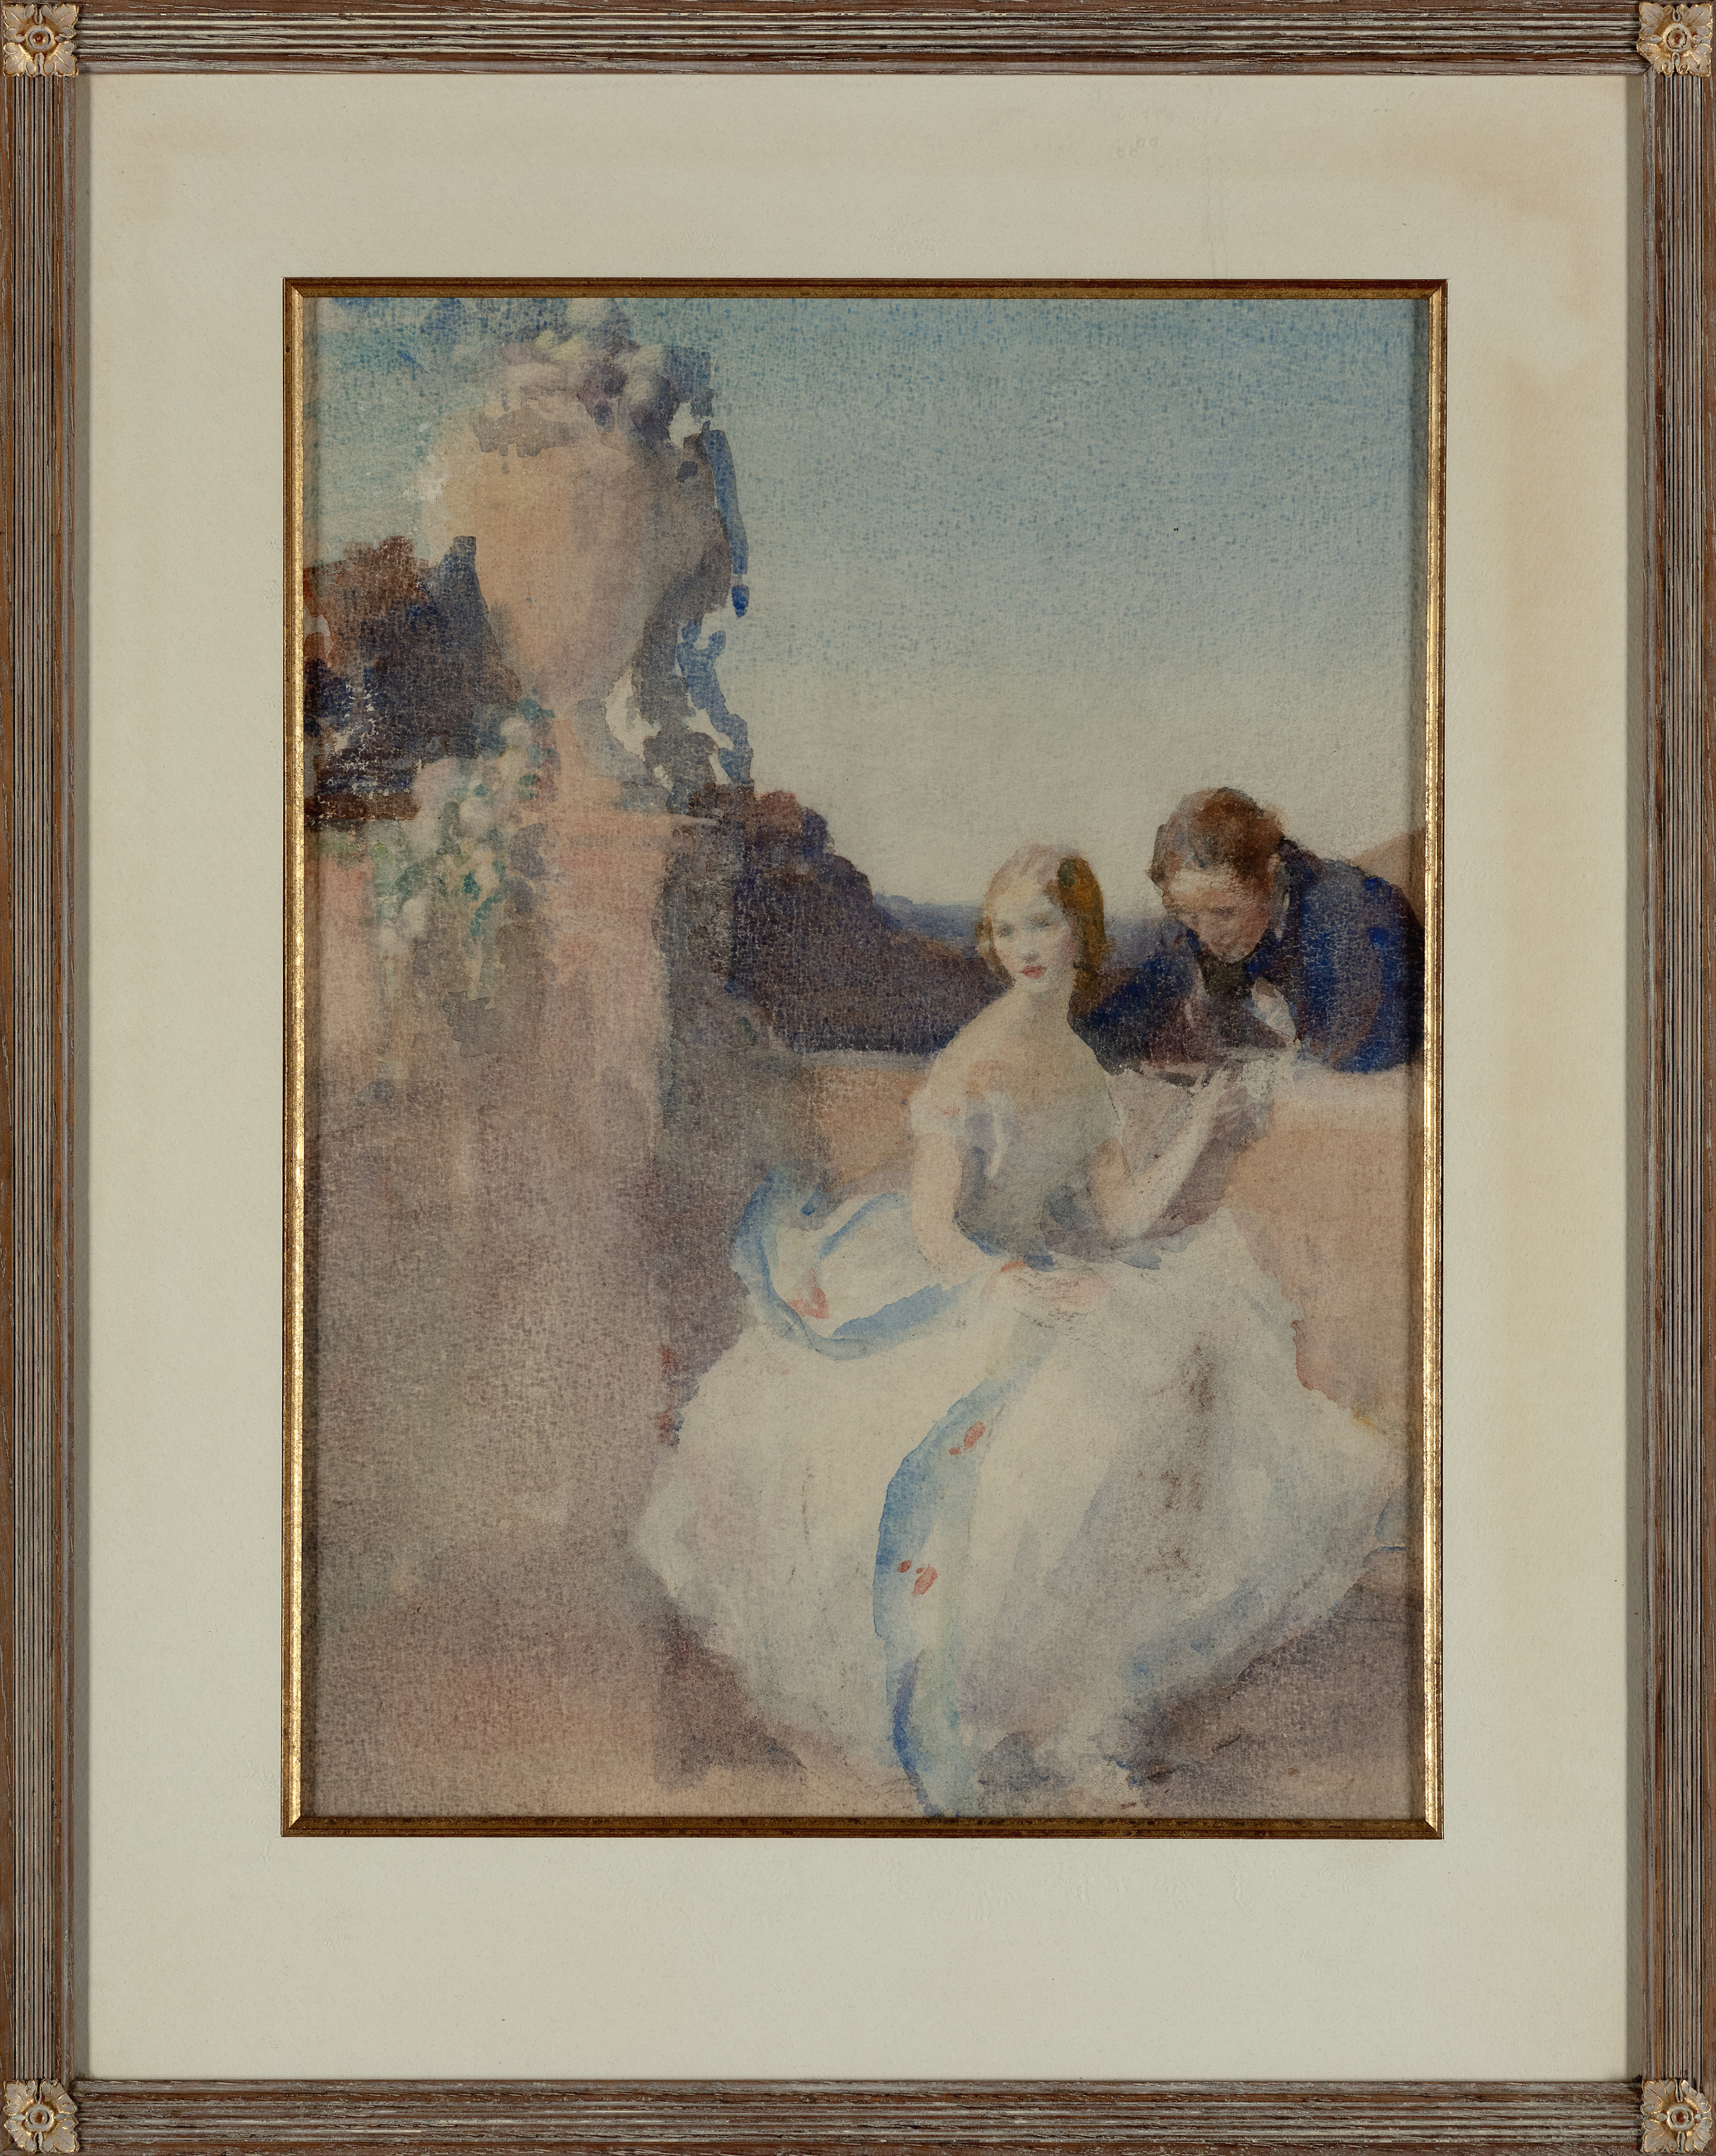 Walter Ernest Webster,  British 1878-1959 -  Courtship scene;  watercolour on paper, 45 x 33.5 cm - Image 2 of 3